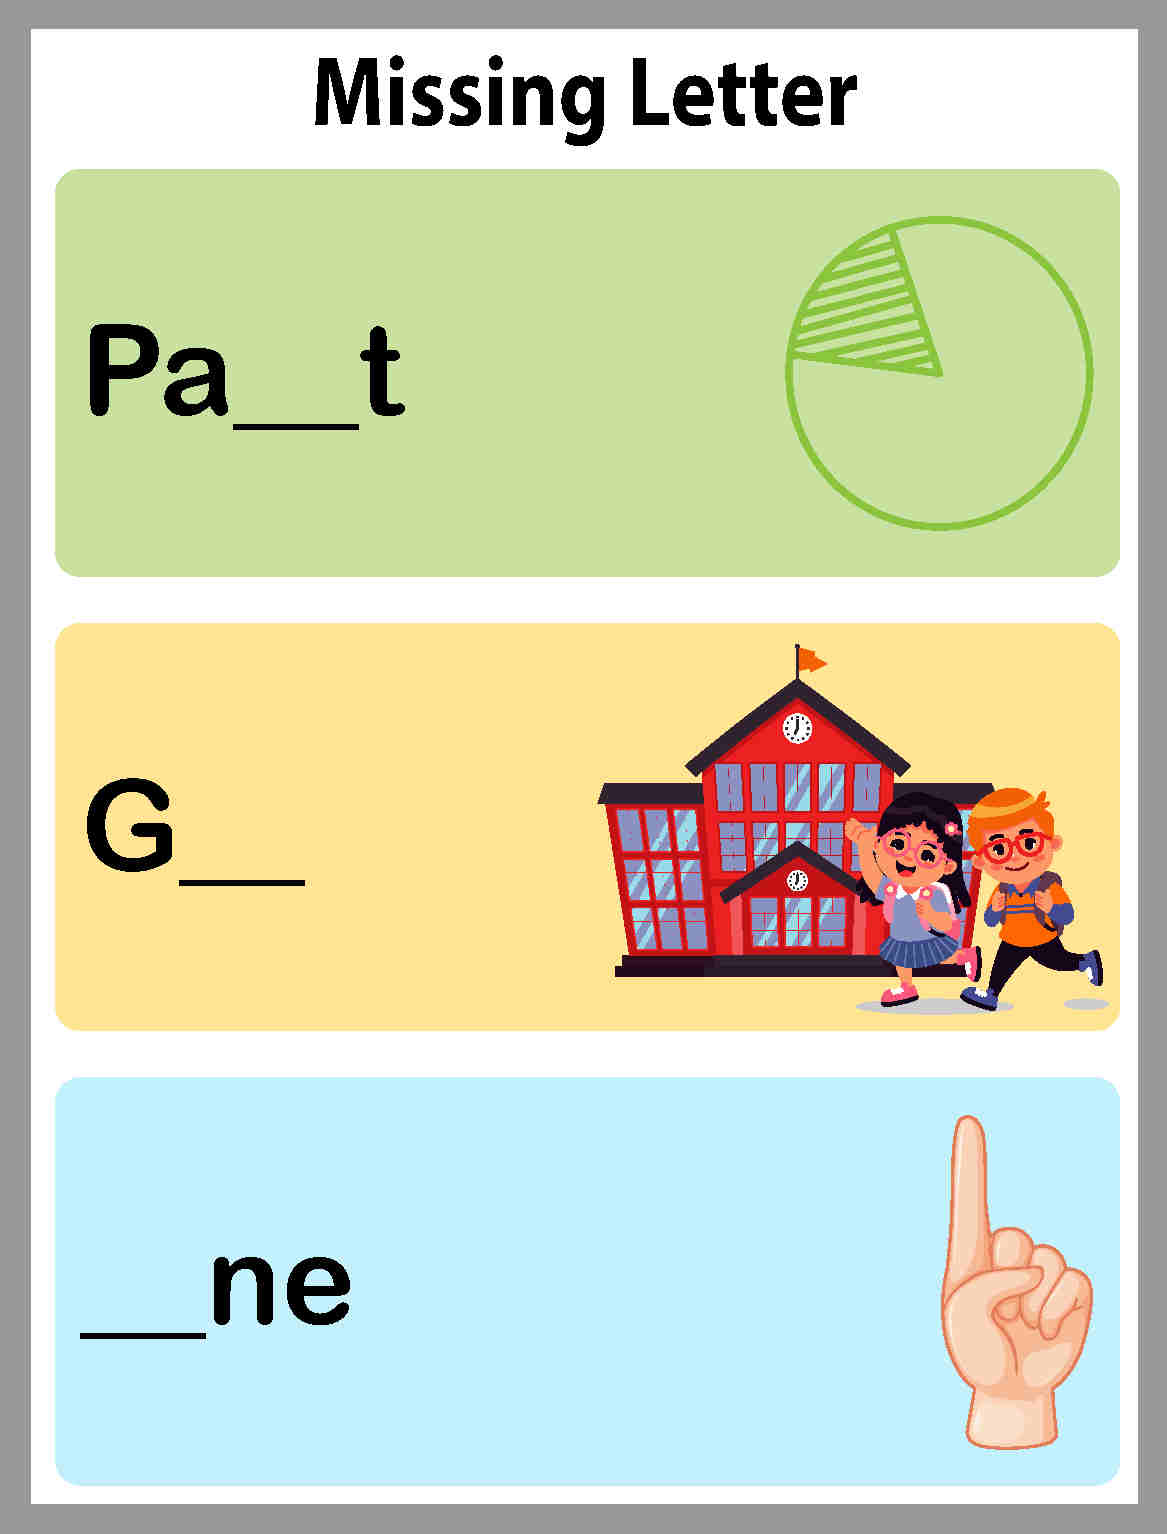 Missing Letter Worksheets are an effective way to help students master the alphabet. These worksheets are designed to provide students with a fun and engaging way for Missing Letter.